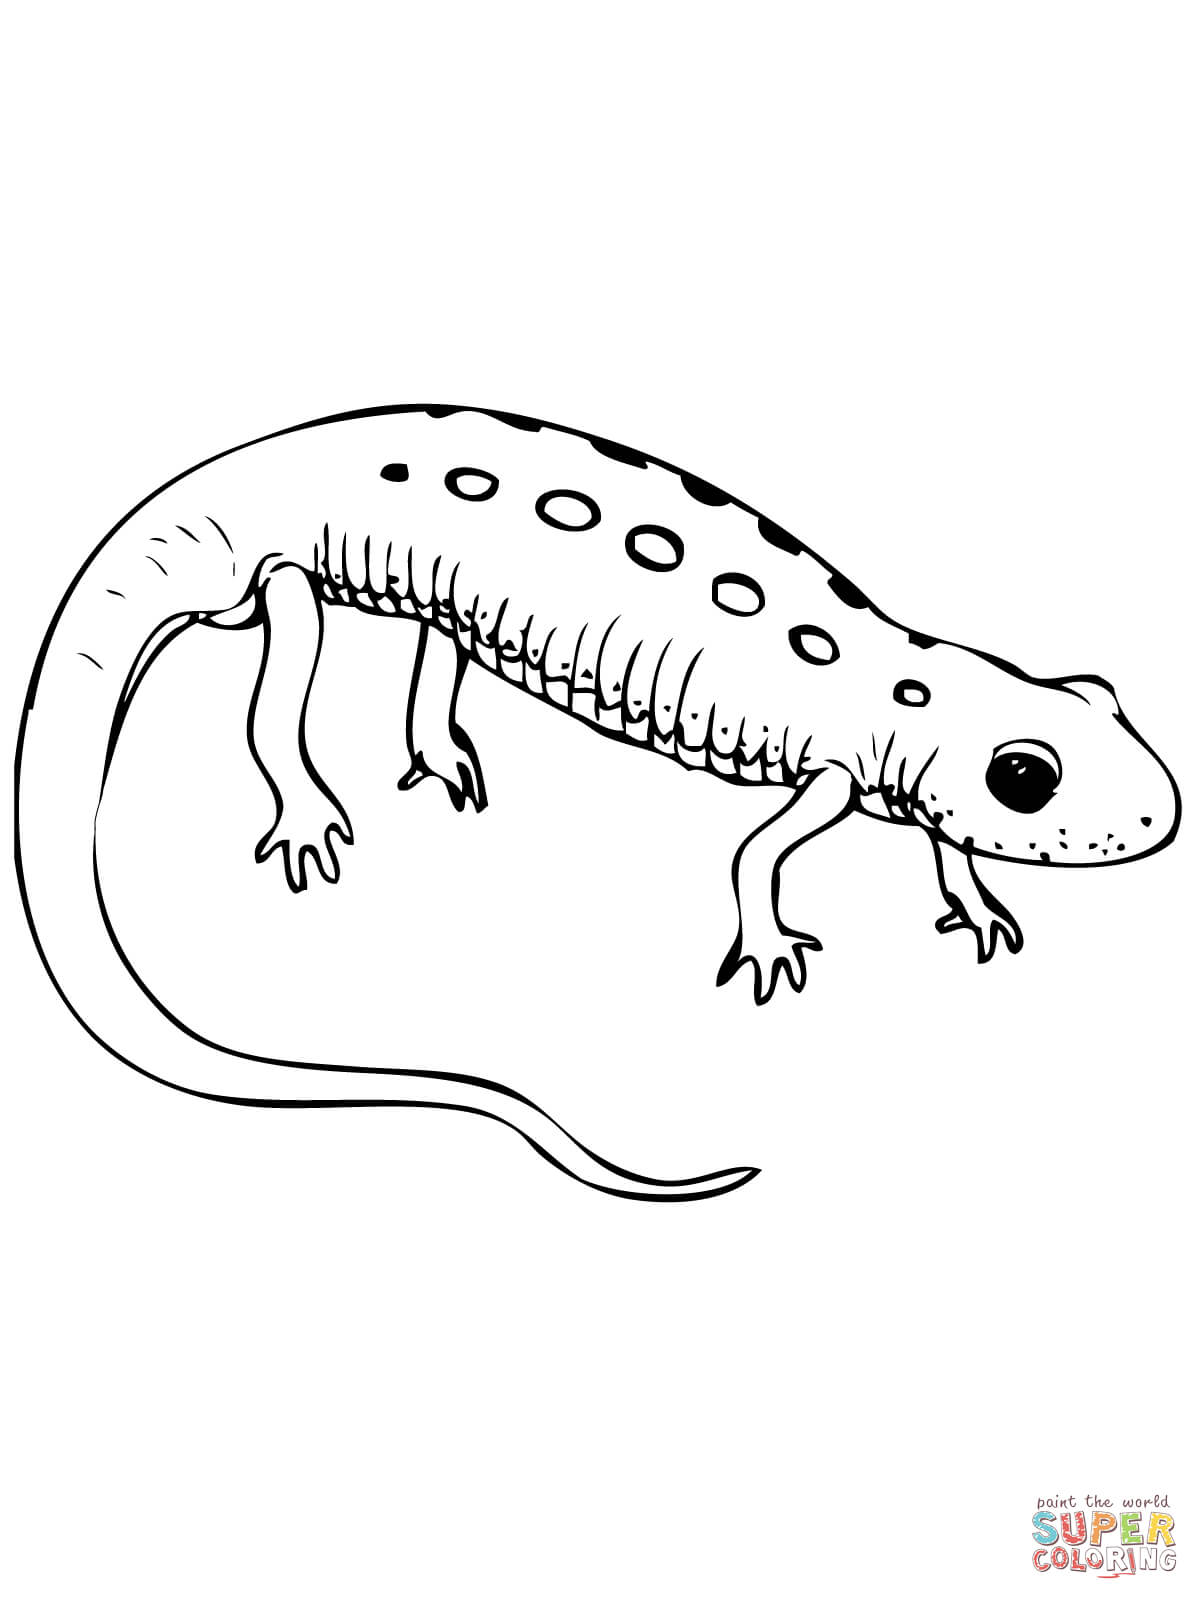 Red Spotted Newt coloring page